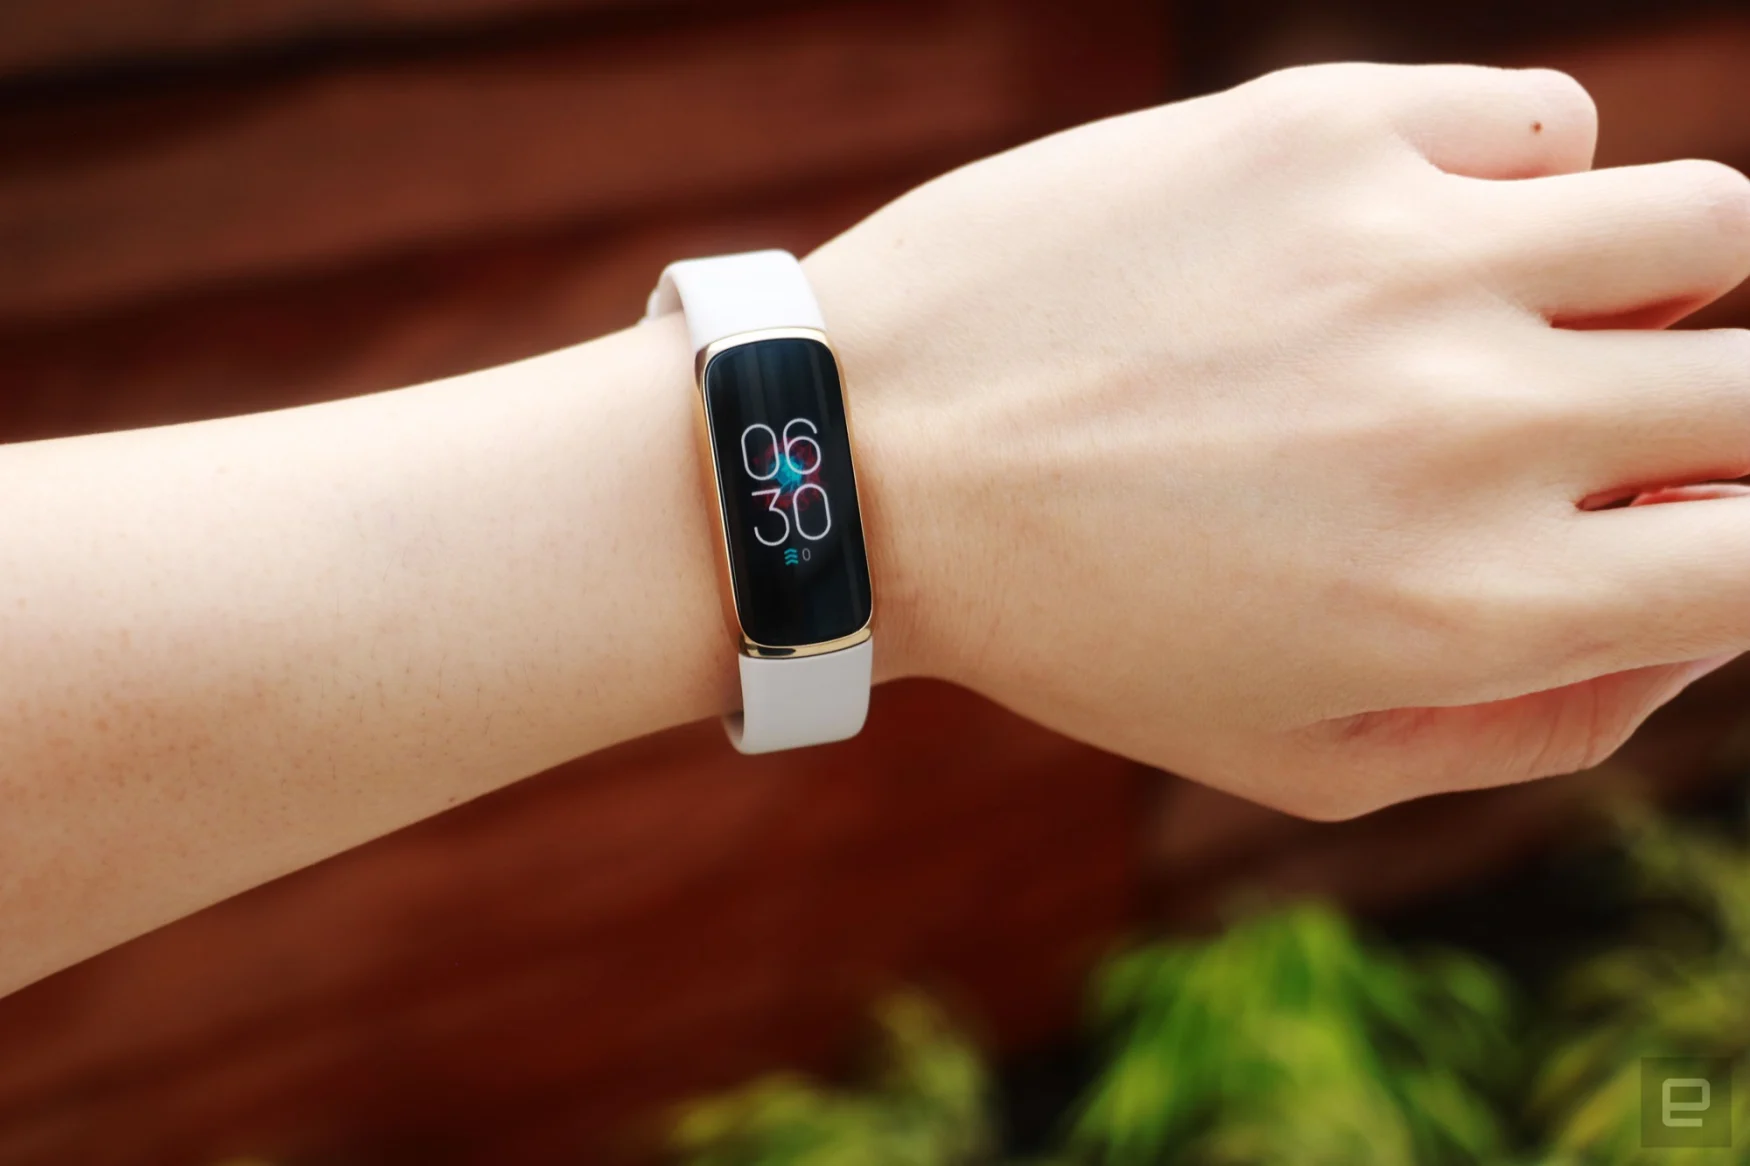 Front view of the Fitbit Luxe with a light pink silicone band on a wrist against a dark brown background with some greenery. The screen shows the time is 6:30pm.